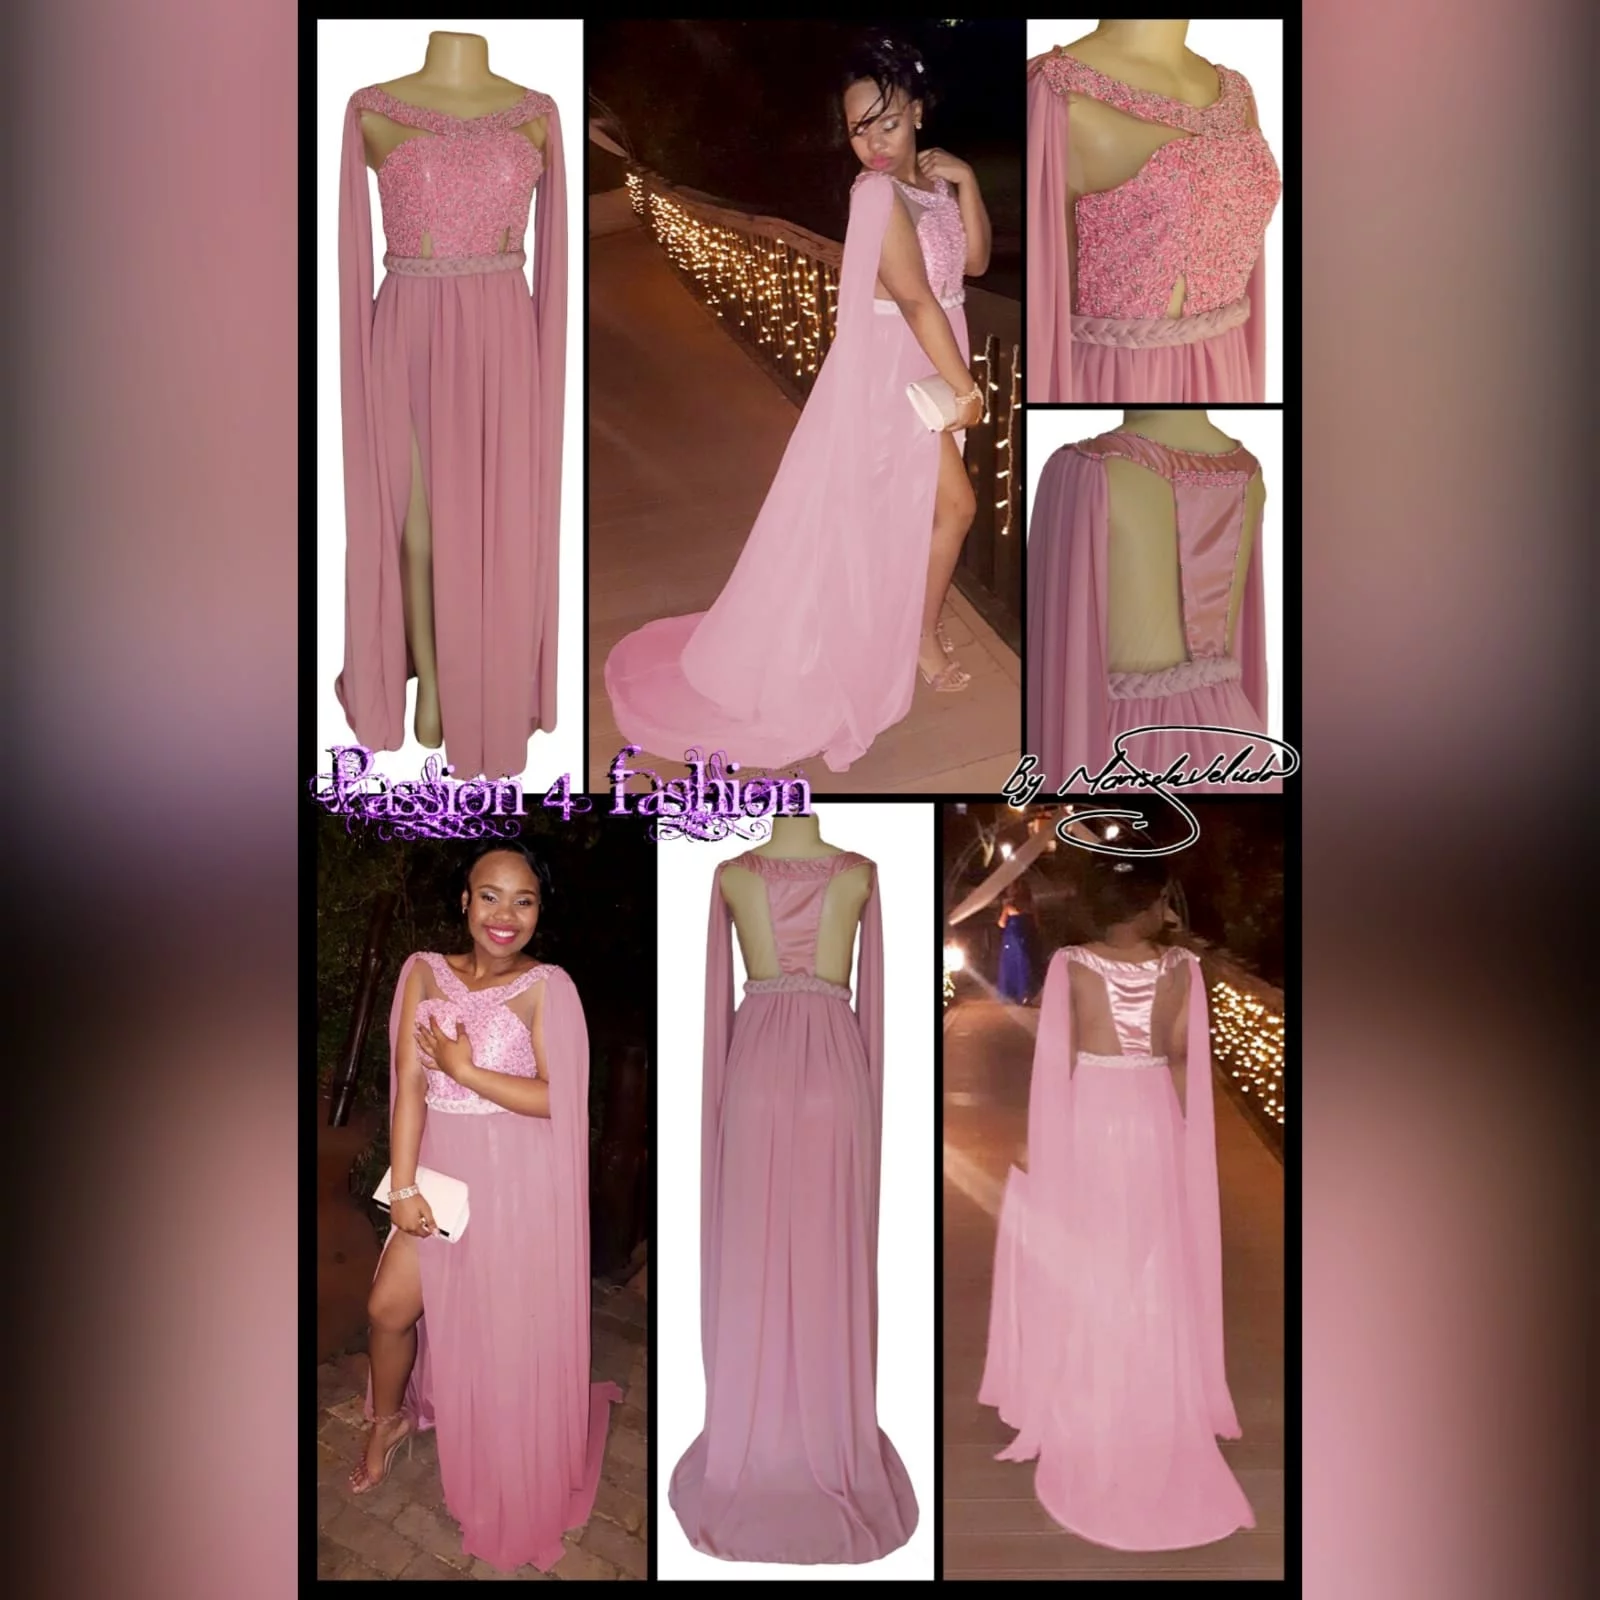 Dusty pink chiffon beaded prom dress 7 dusty pink chiffon beaded prom dress, bateau neckline effect with an illusion back, fully beaded bodice, plaited belt detail with a slit and a train. Shoulders with chiffon draping creating a goddess look.